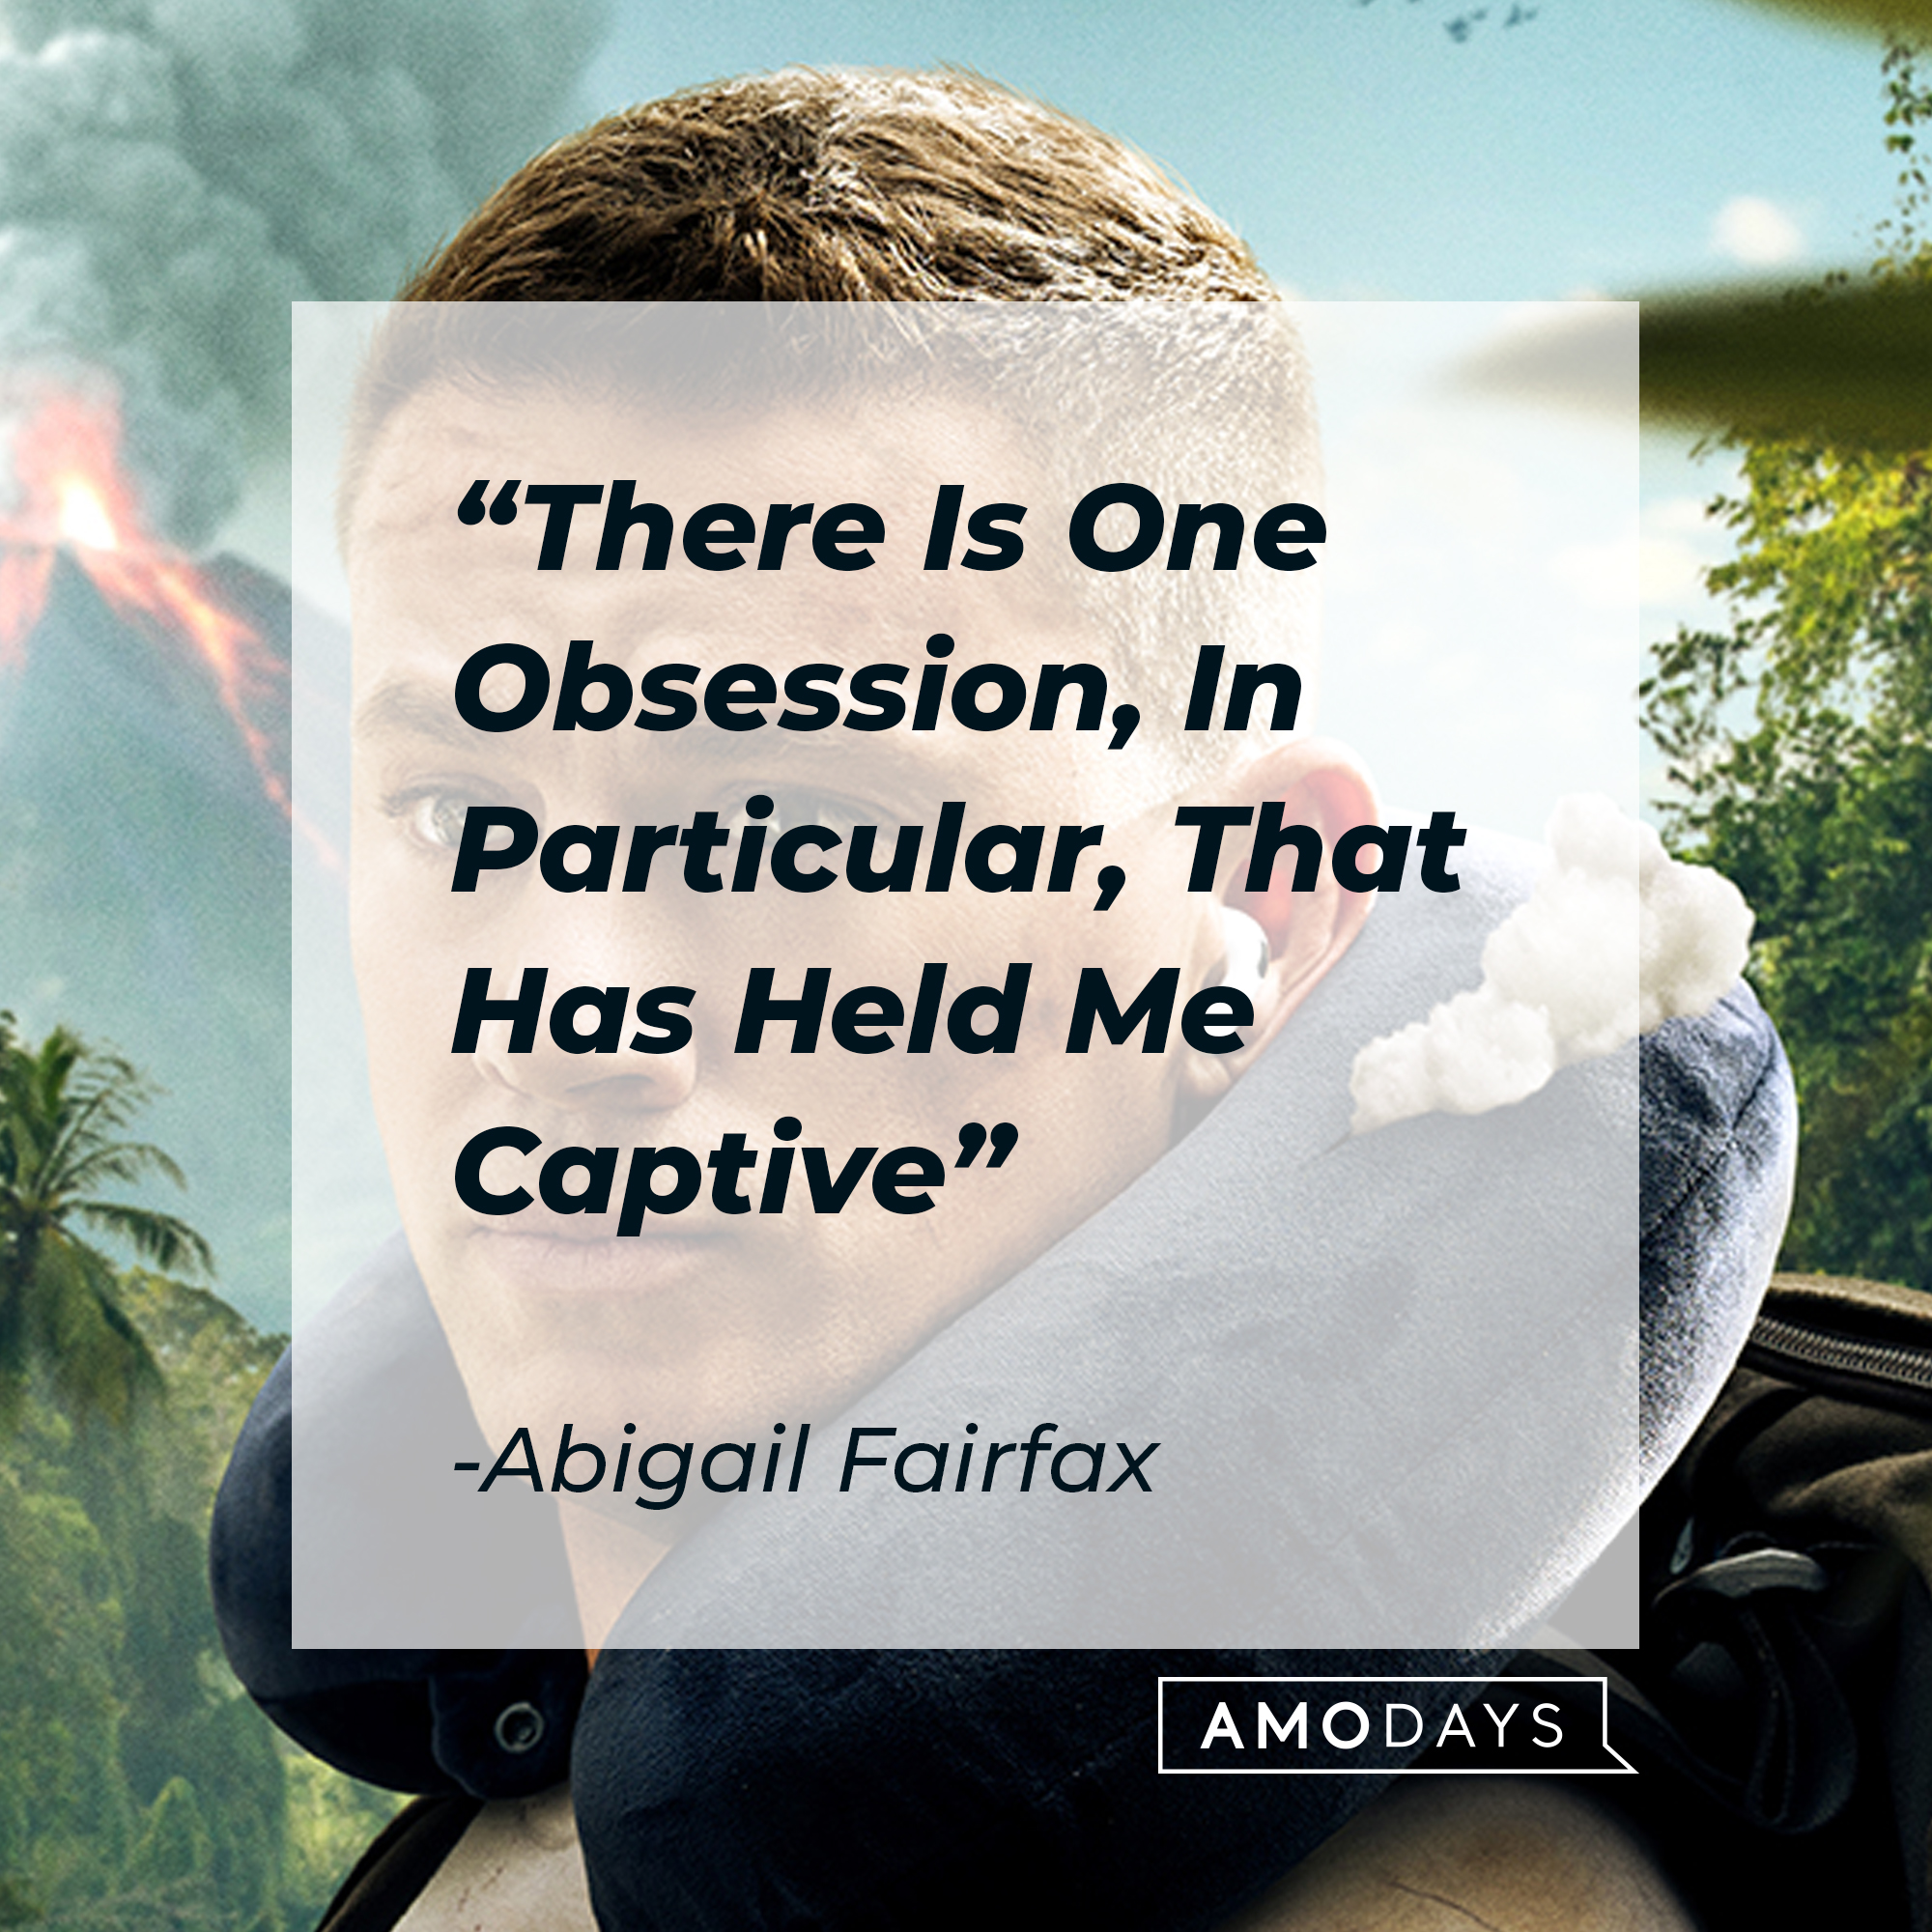 Abigail Fairfax with his quote: "There Is One Obsession, In Particular, That Has Held Me Captive." | Source: facebook.com/TheLostCityMovie